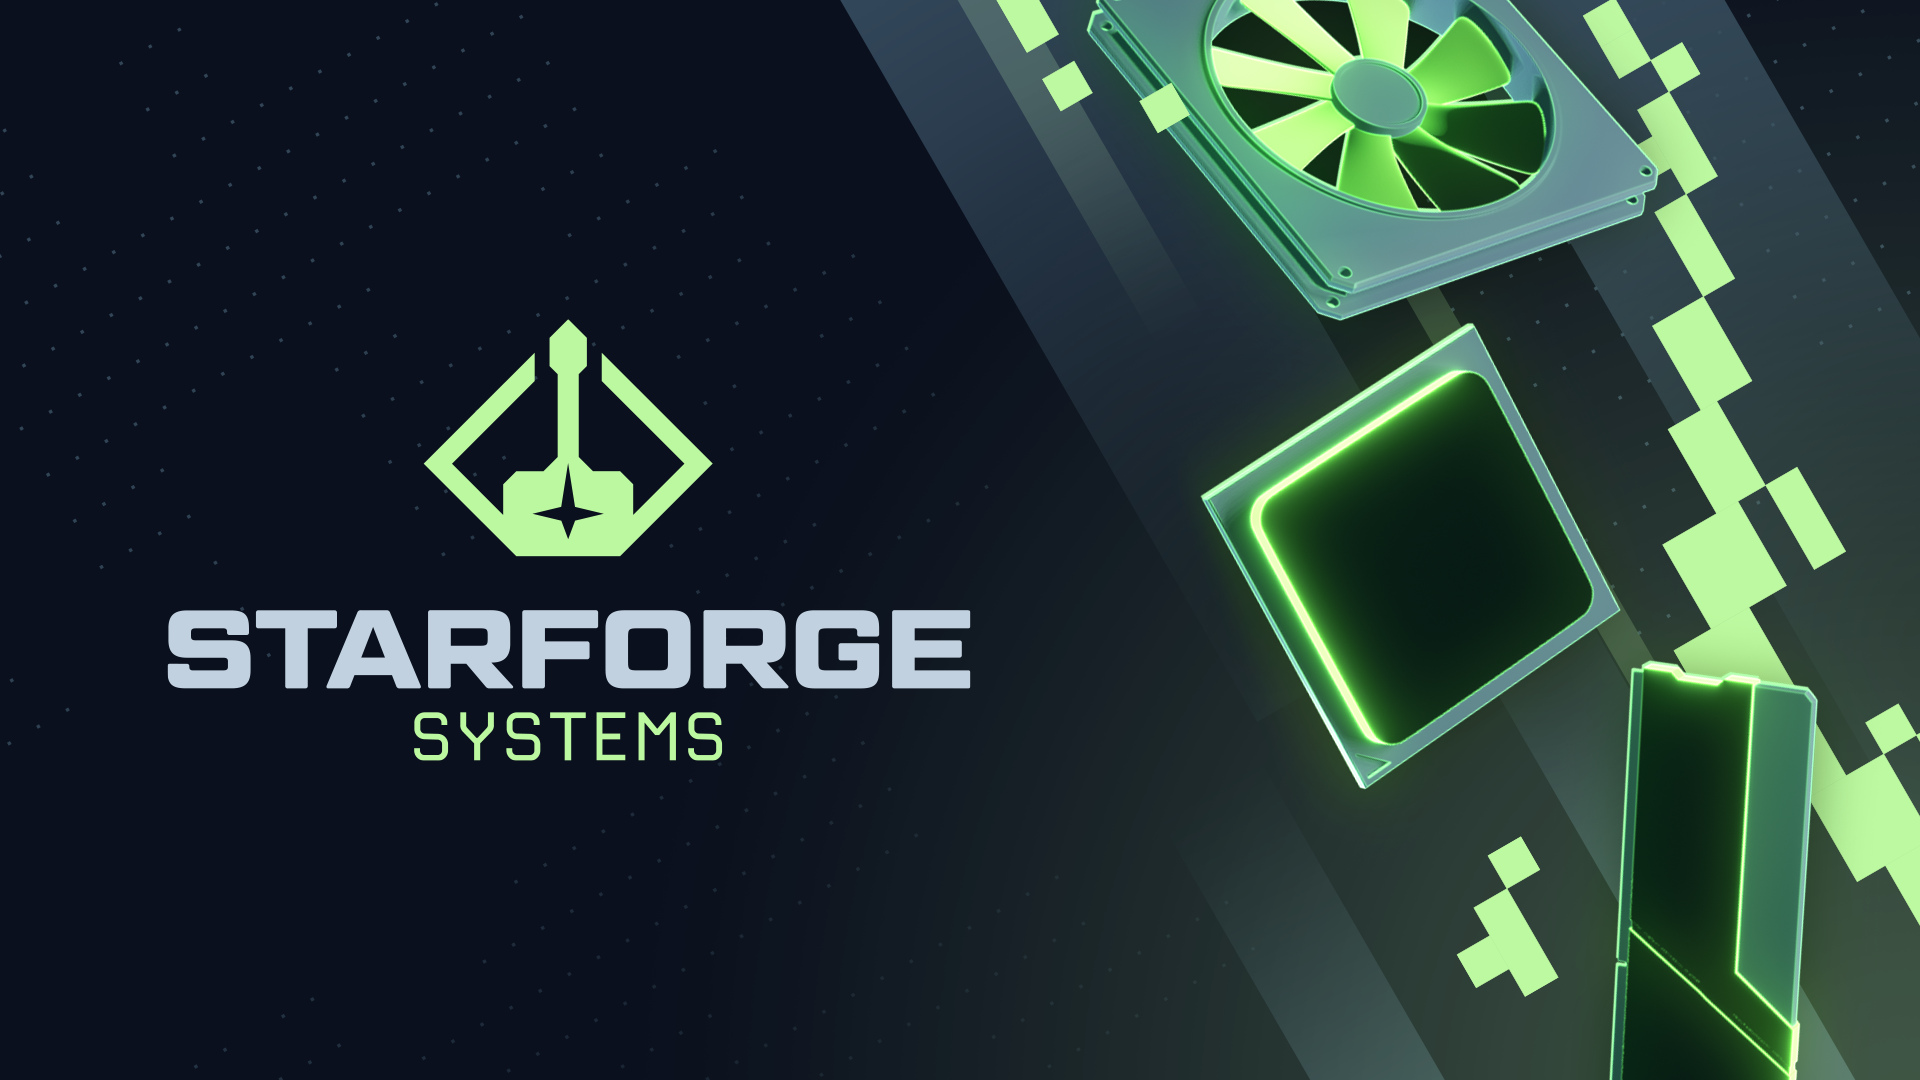 Starforge systems logo floating next to computer parts